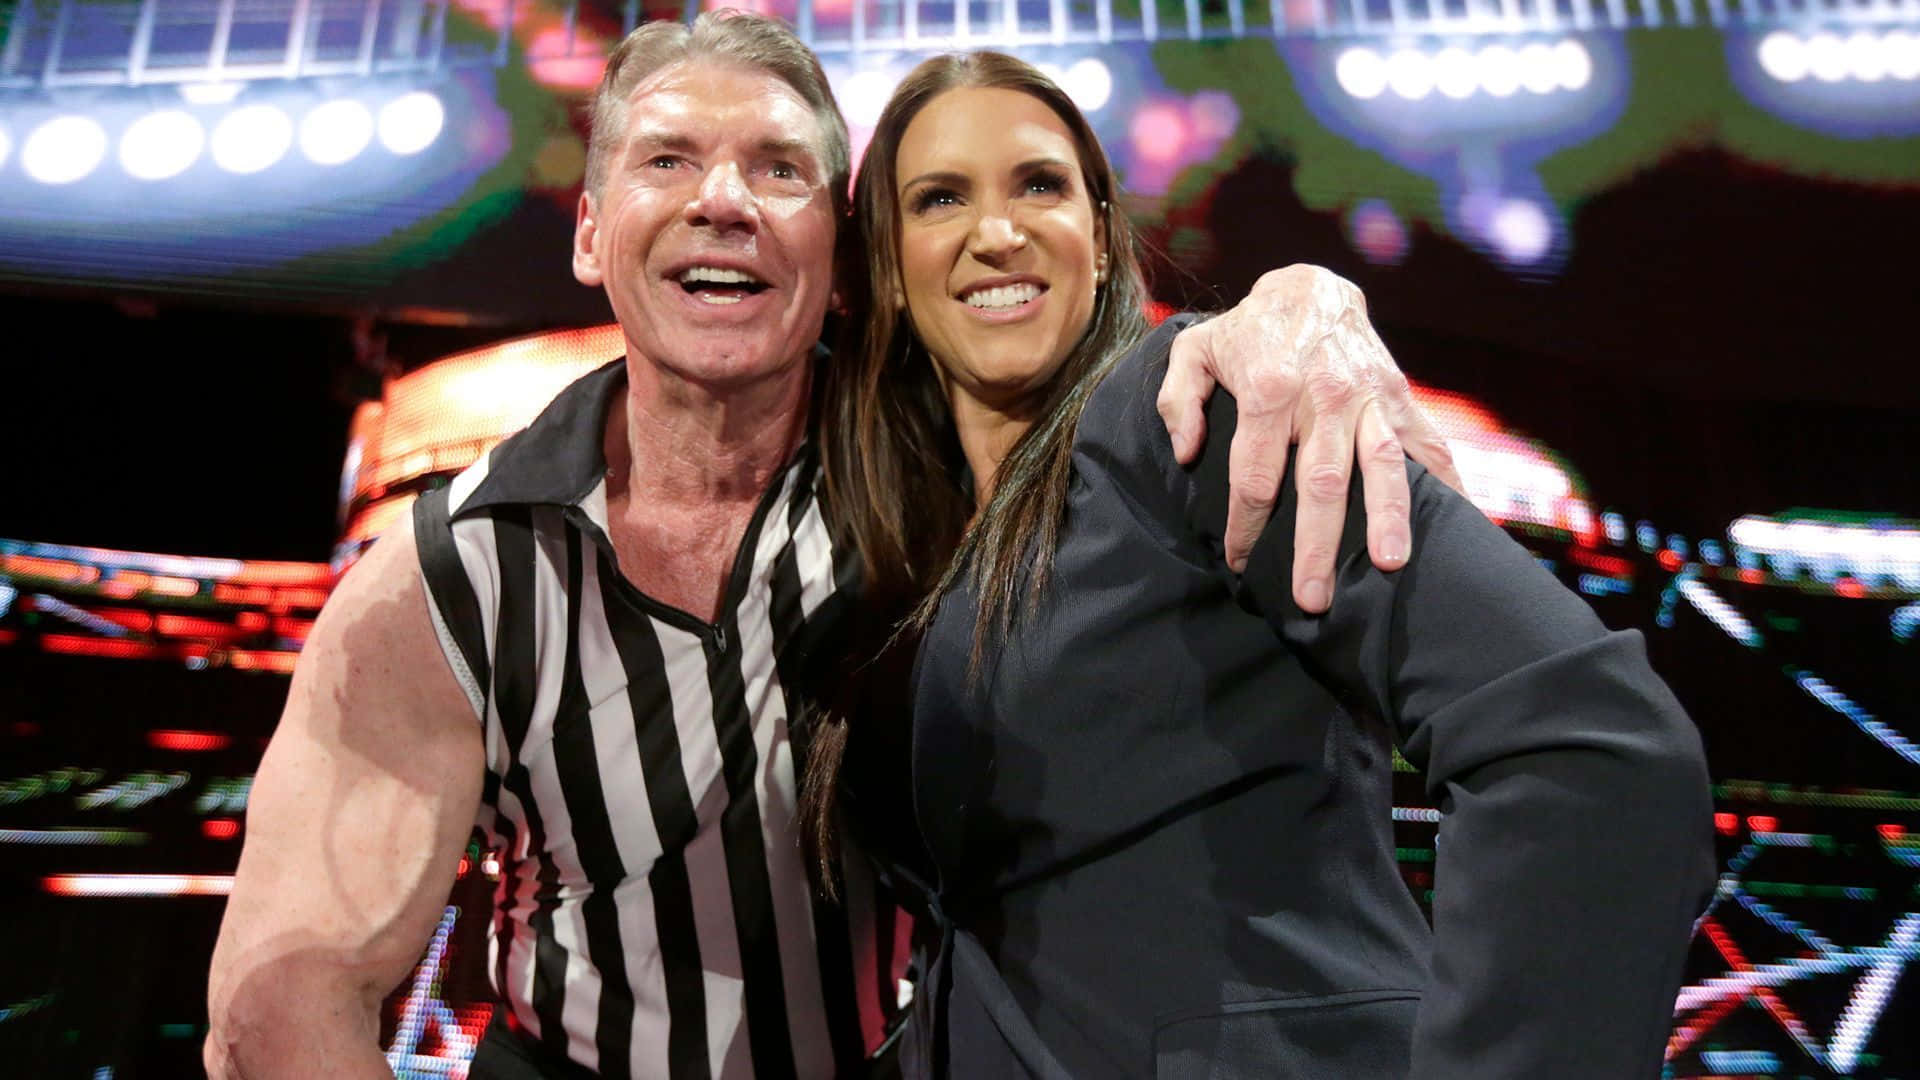 Vince McMahon and Stephanie McMahon share a moment together Wallpaper